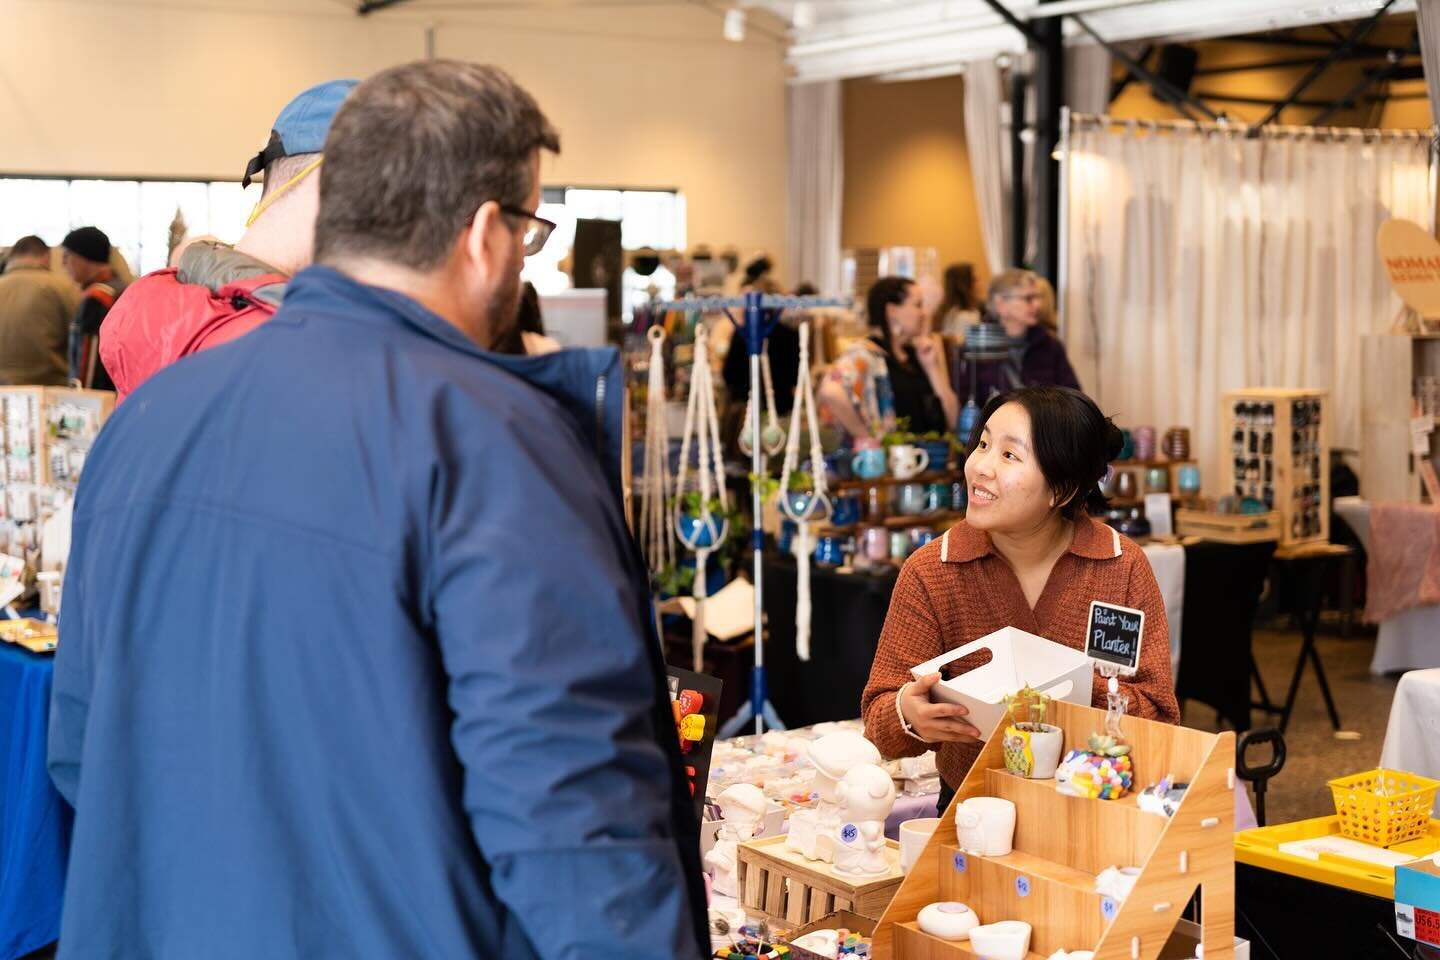 💕 Big thanks to all who joined us at the Quincy Street Makers Market last Sunday! 

Can&rsquo;t wait to do it all over again on April 21st @quincyhallmpls. Don&rsquo;t miss out on the chance to discover and support our incredible makers! 🗓️Save the